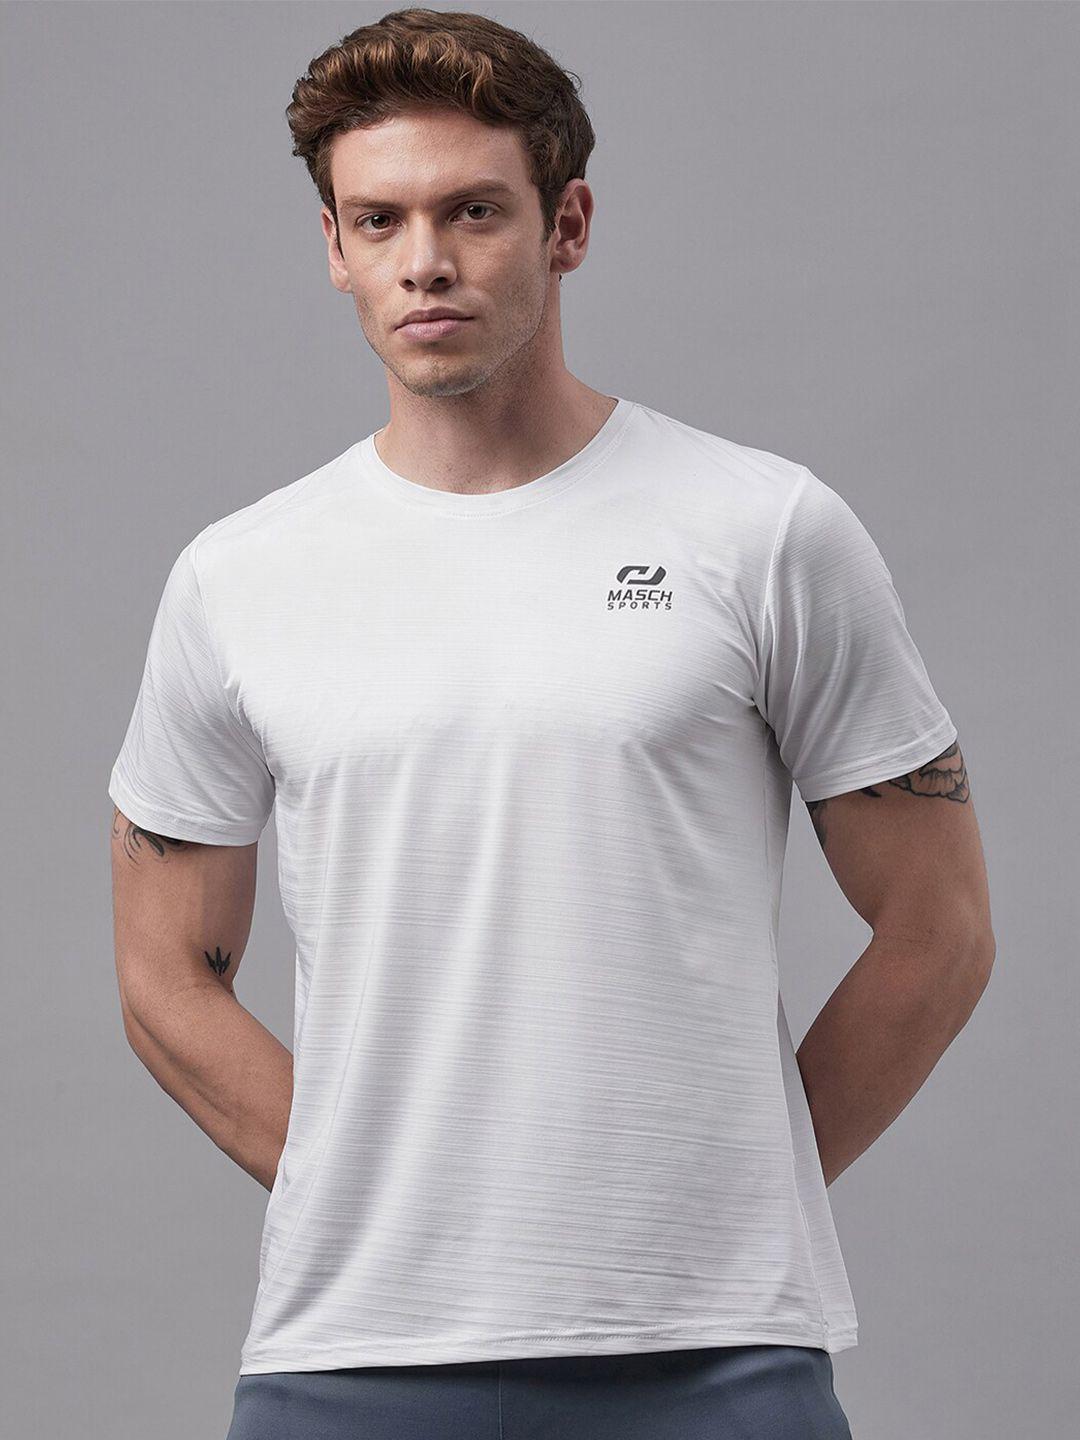 masch sports training or gym dry-fit t-shirt